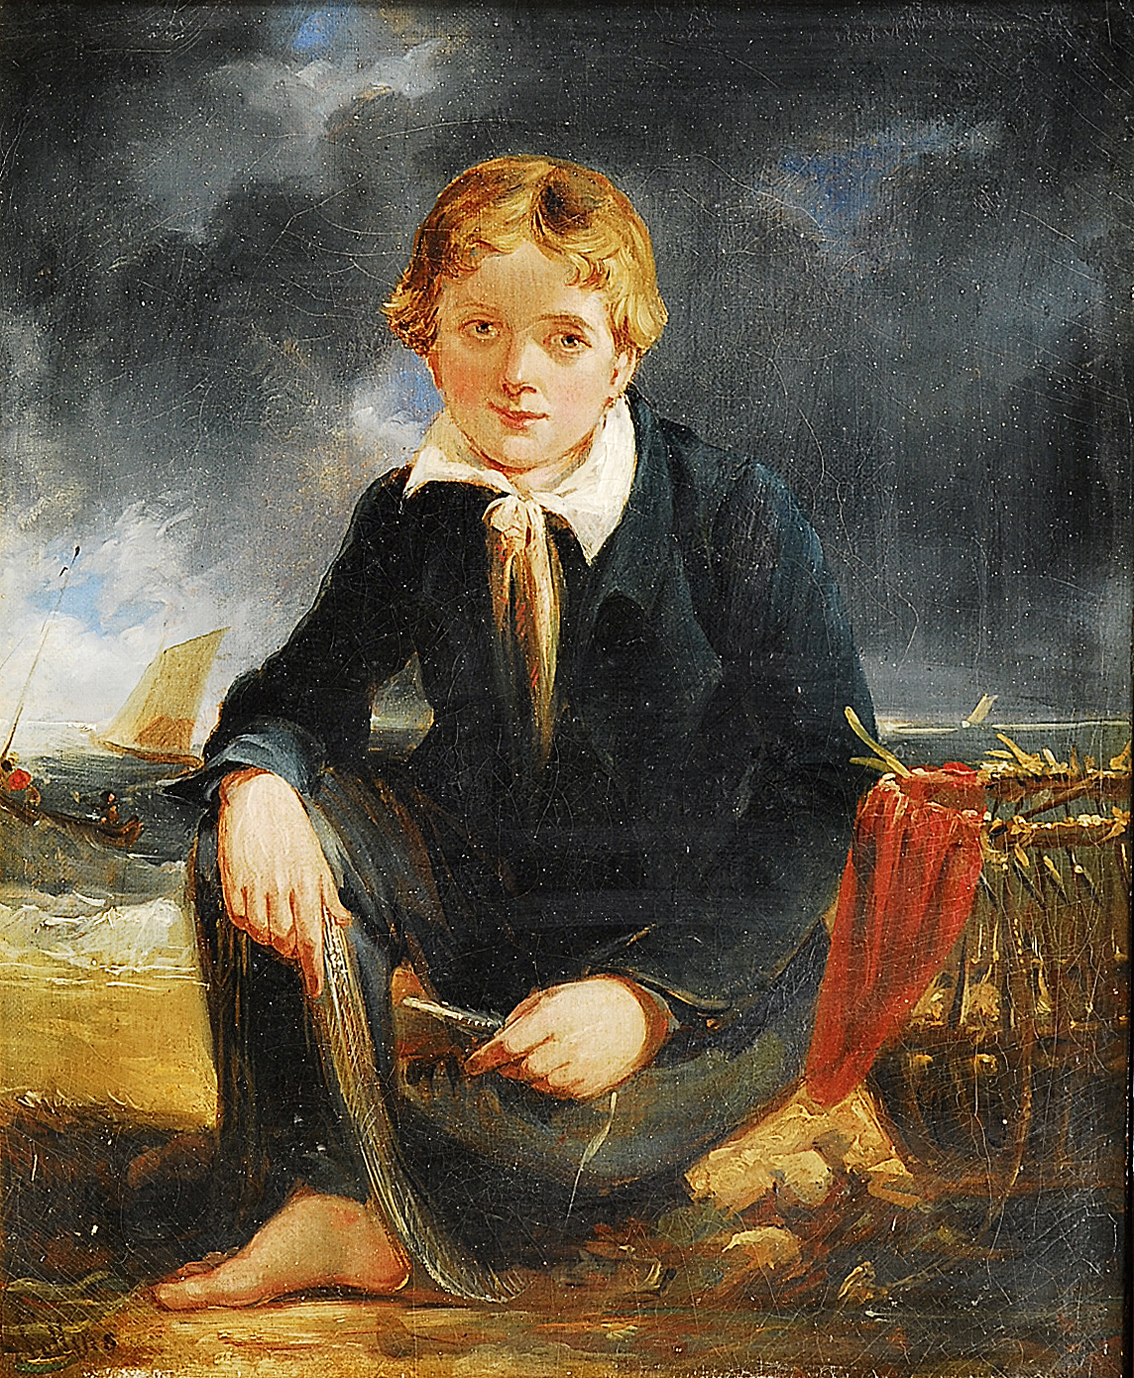 A young fisherman